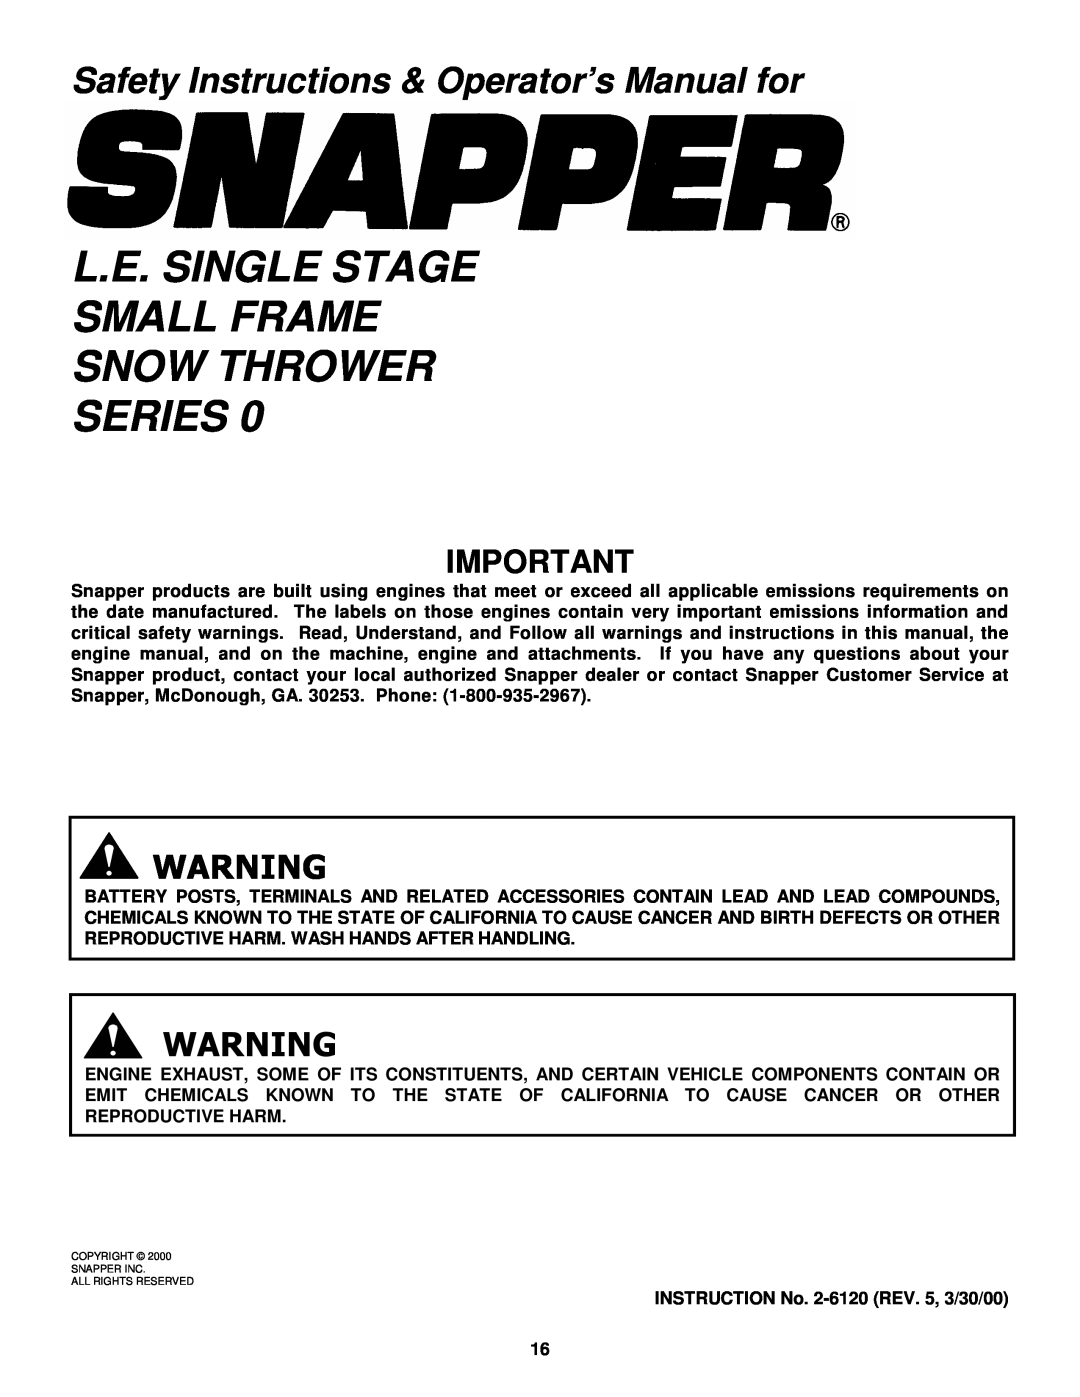 Snapper LE3190E, LE3190R, LE3190E, LE3170R, LE3190R, LE3190E L.E. Single Stage Small Frame Snow Thrower Series 